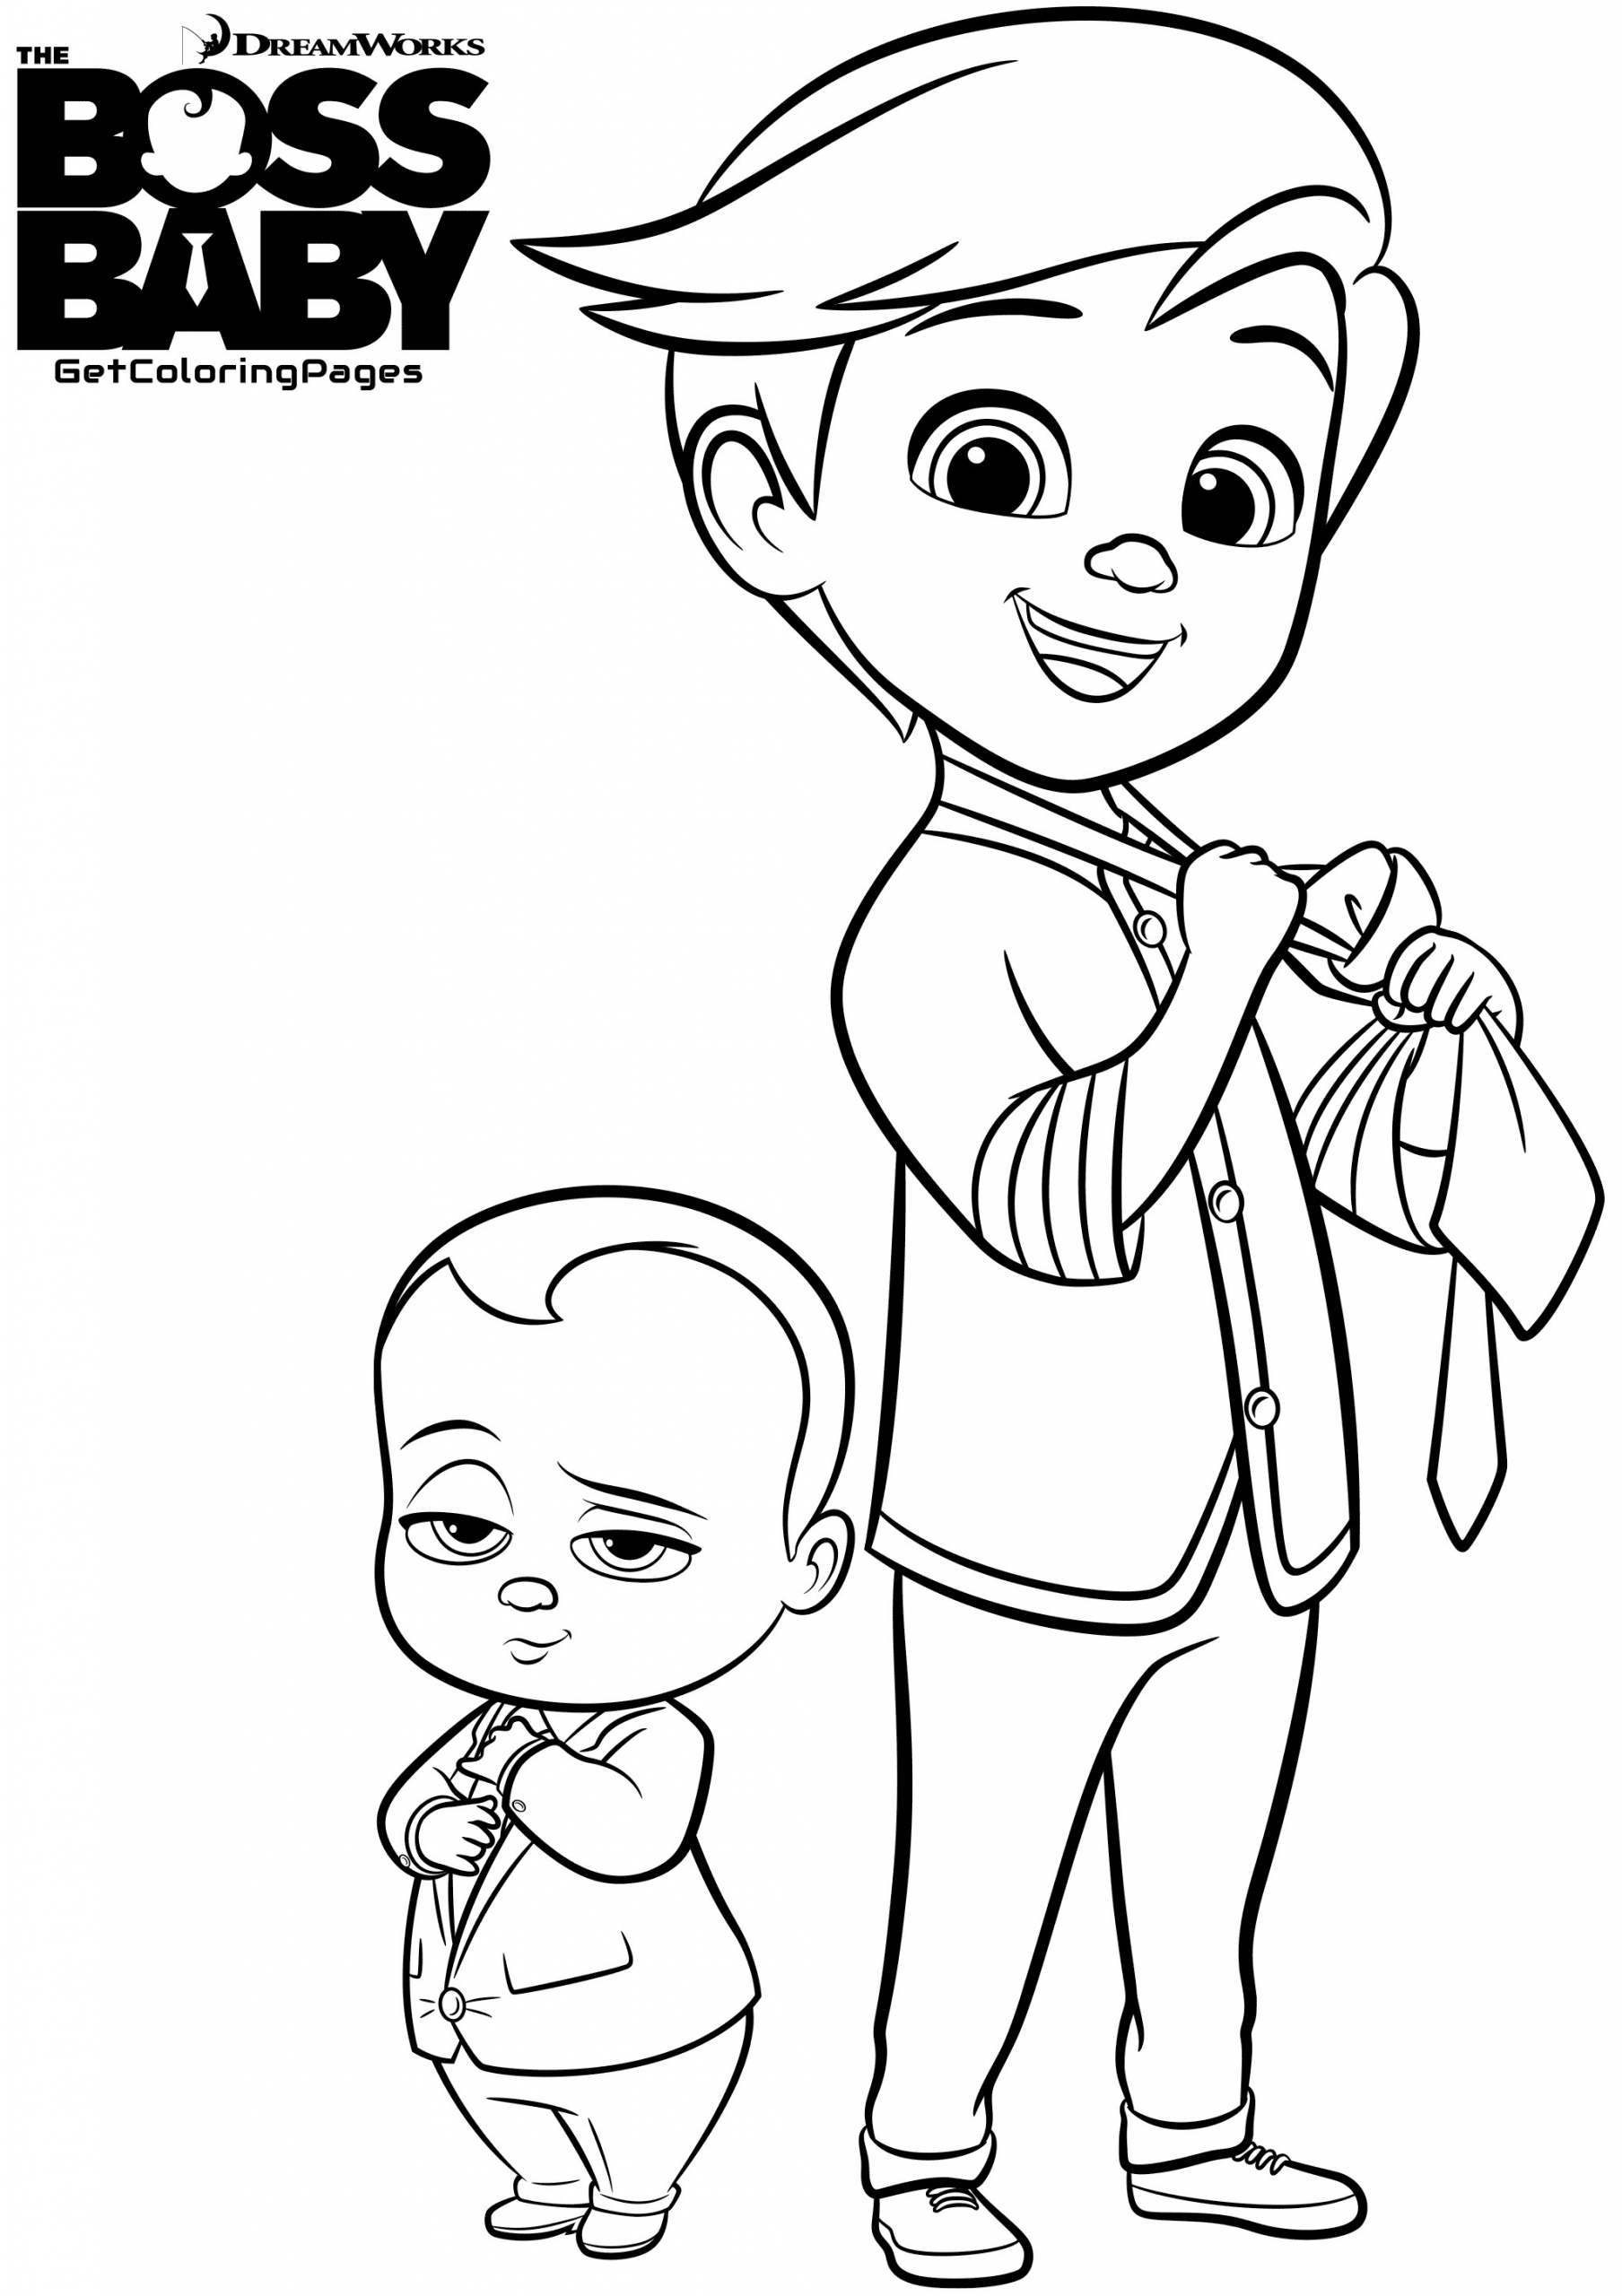 Coloring Websites For Kids
 Baby boss to color for kids Baby Boss Kids Coloring Pages